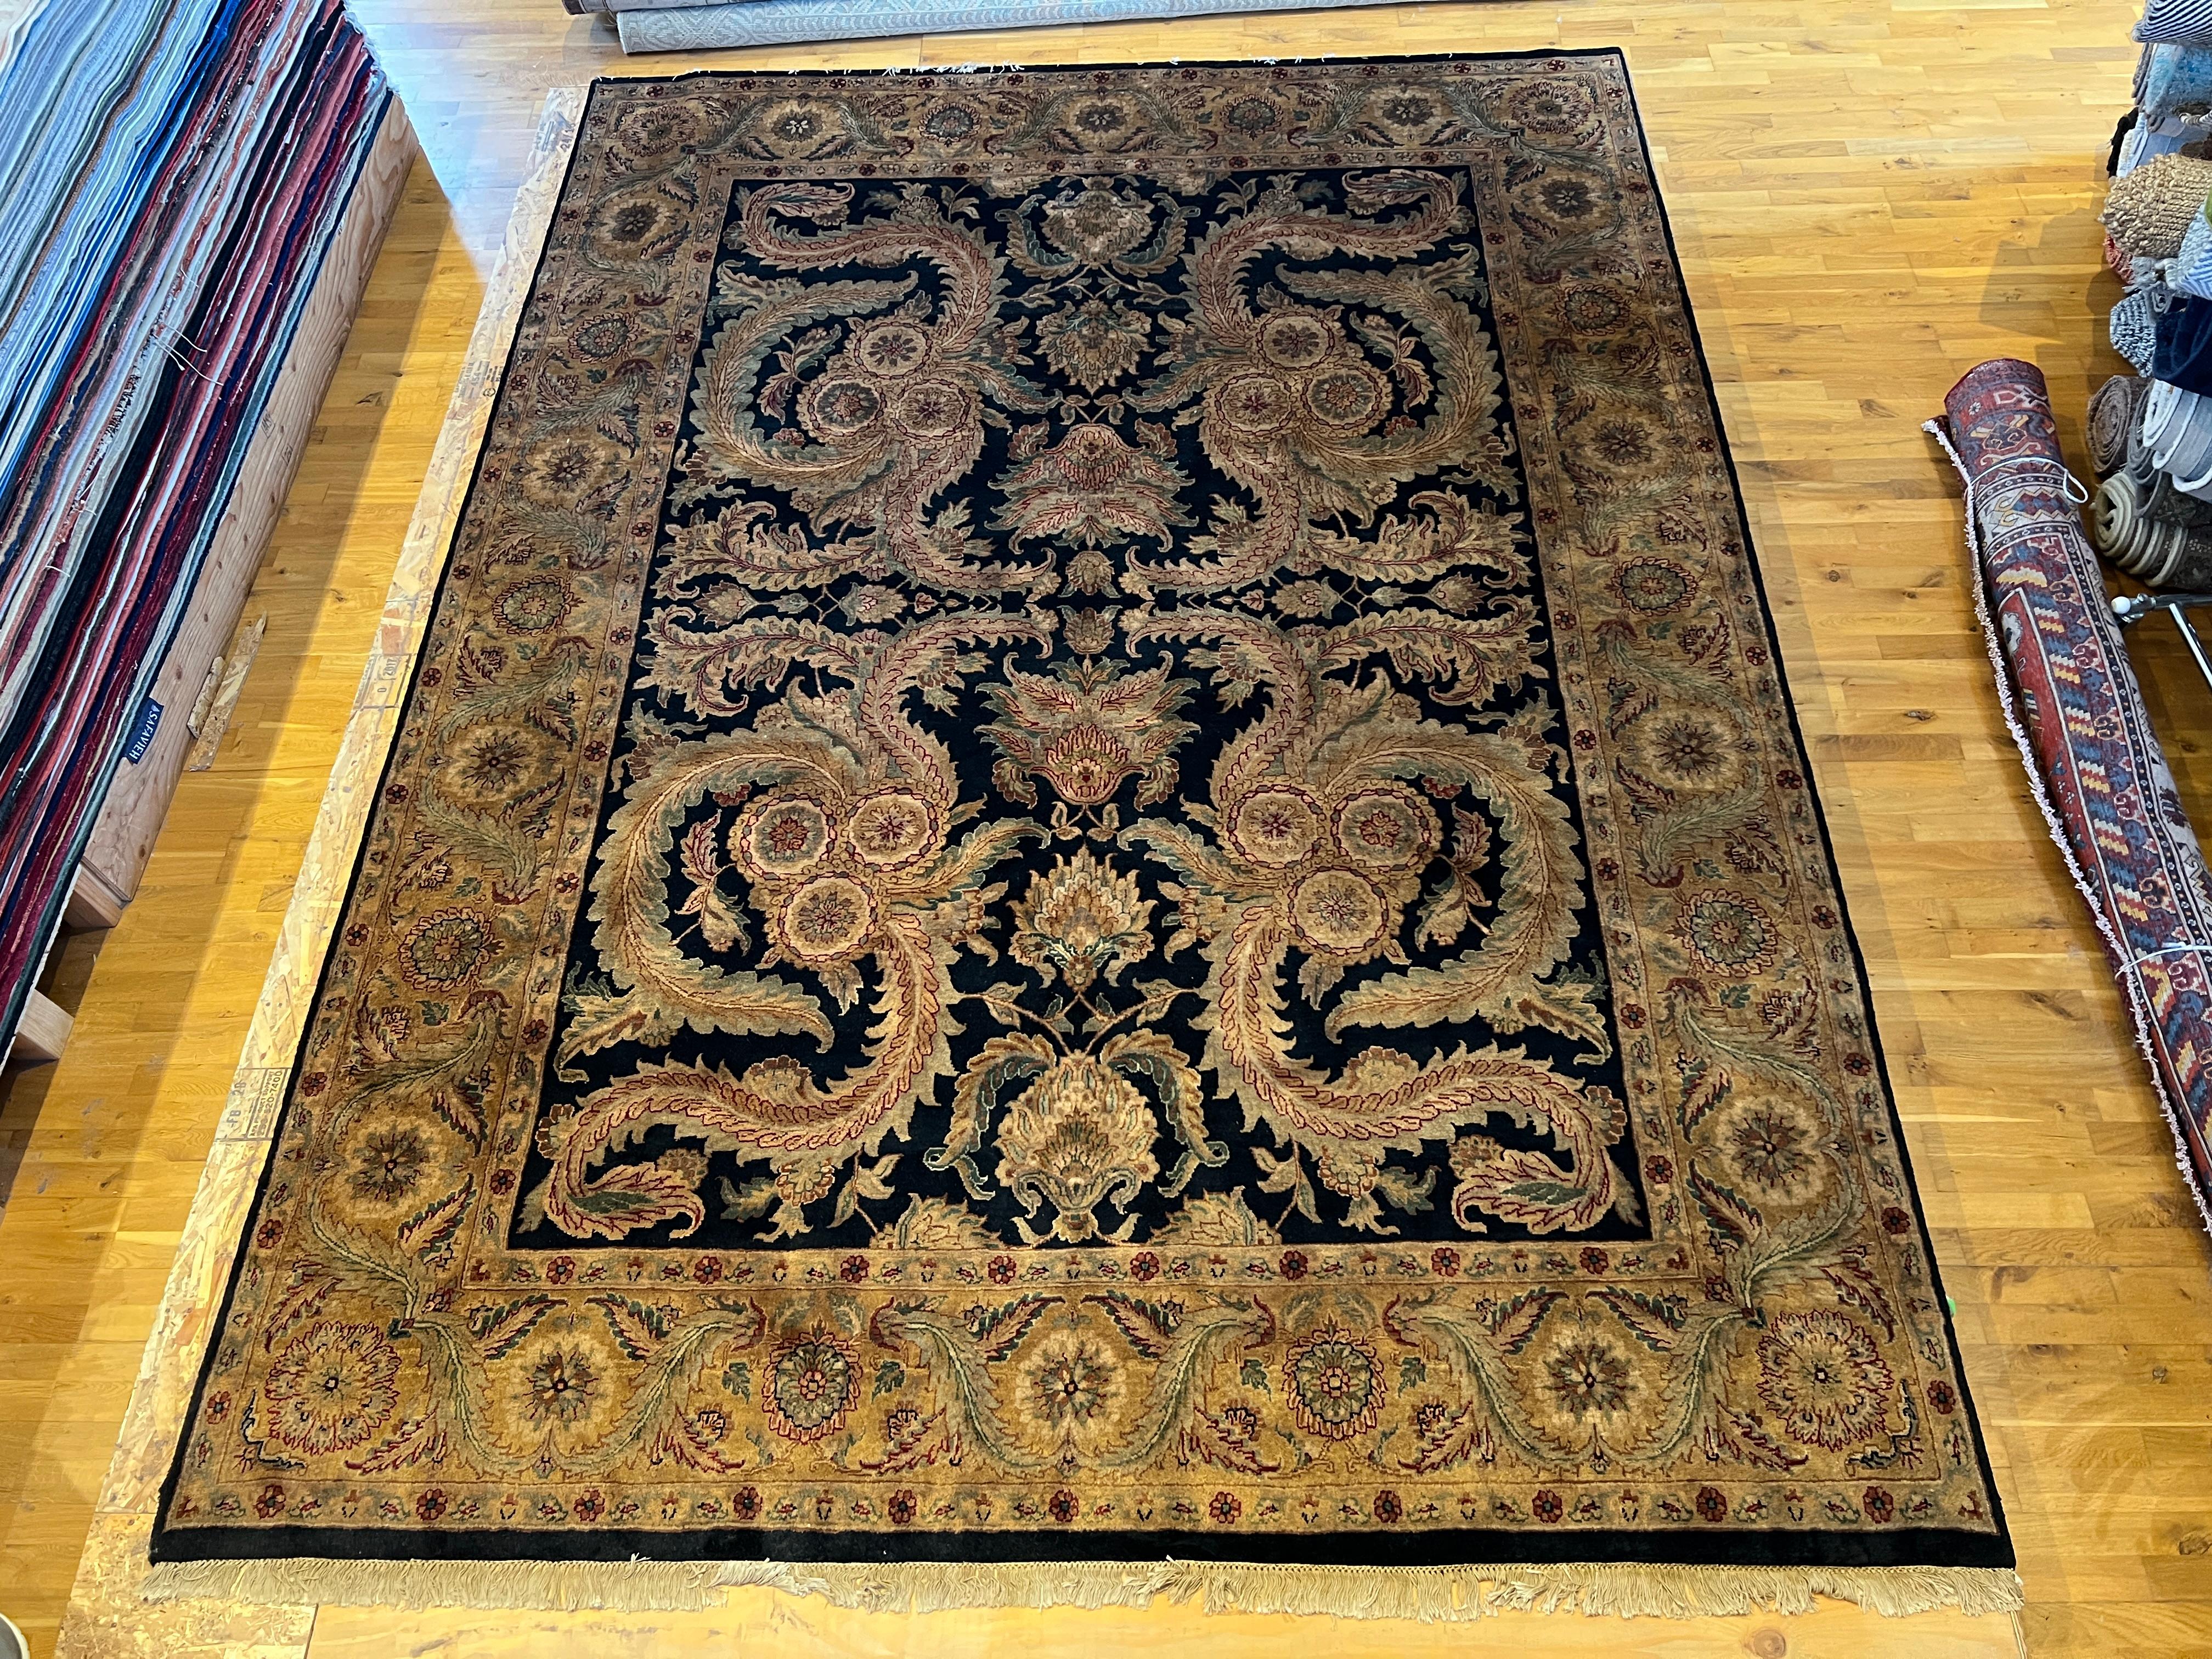 Introducing our beautiful 9'x12' Persian design rug, hand-knotted in India using all wool and natural dyes. Featuring a modernized black field and ivory border, this rug will add a touch of elegance and sophistication to any room. Experience the